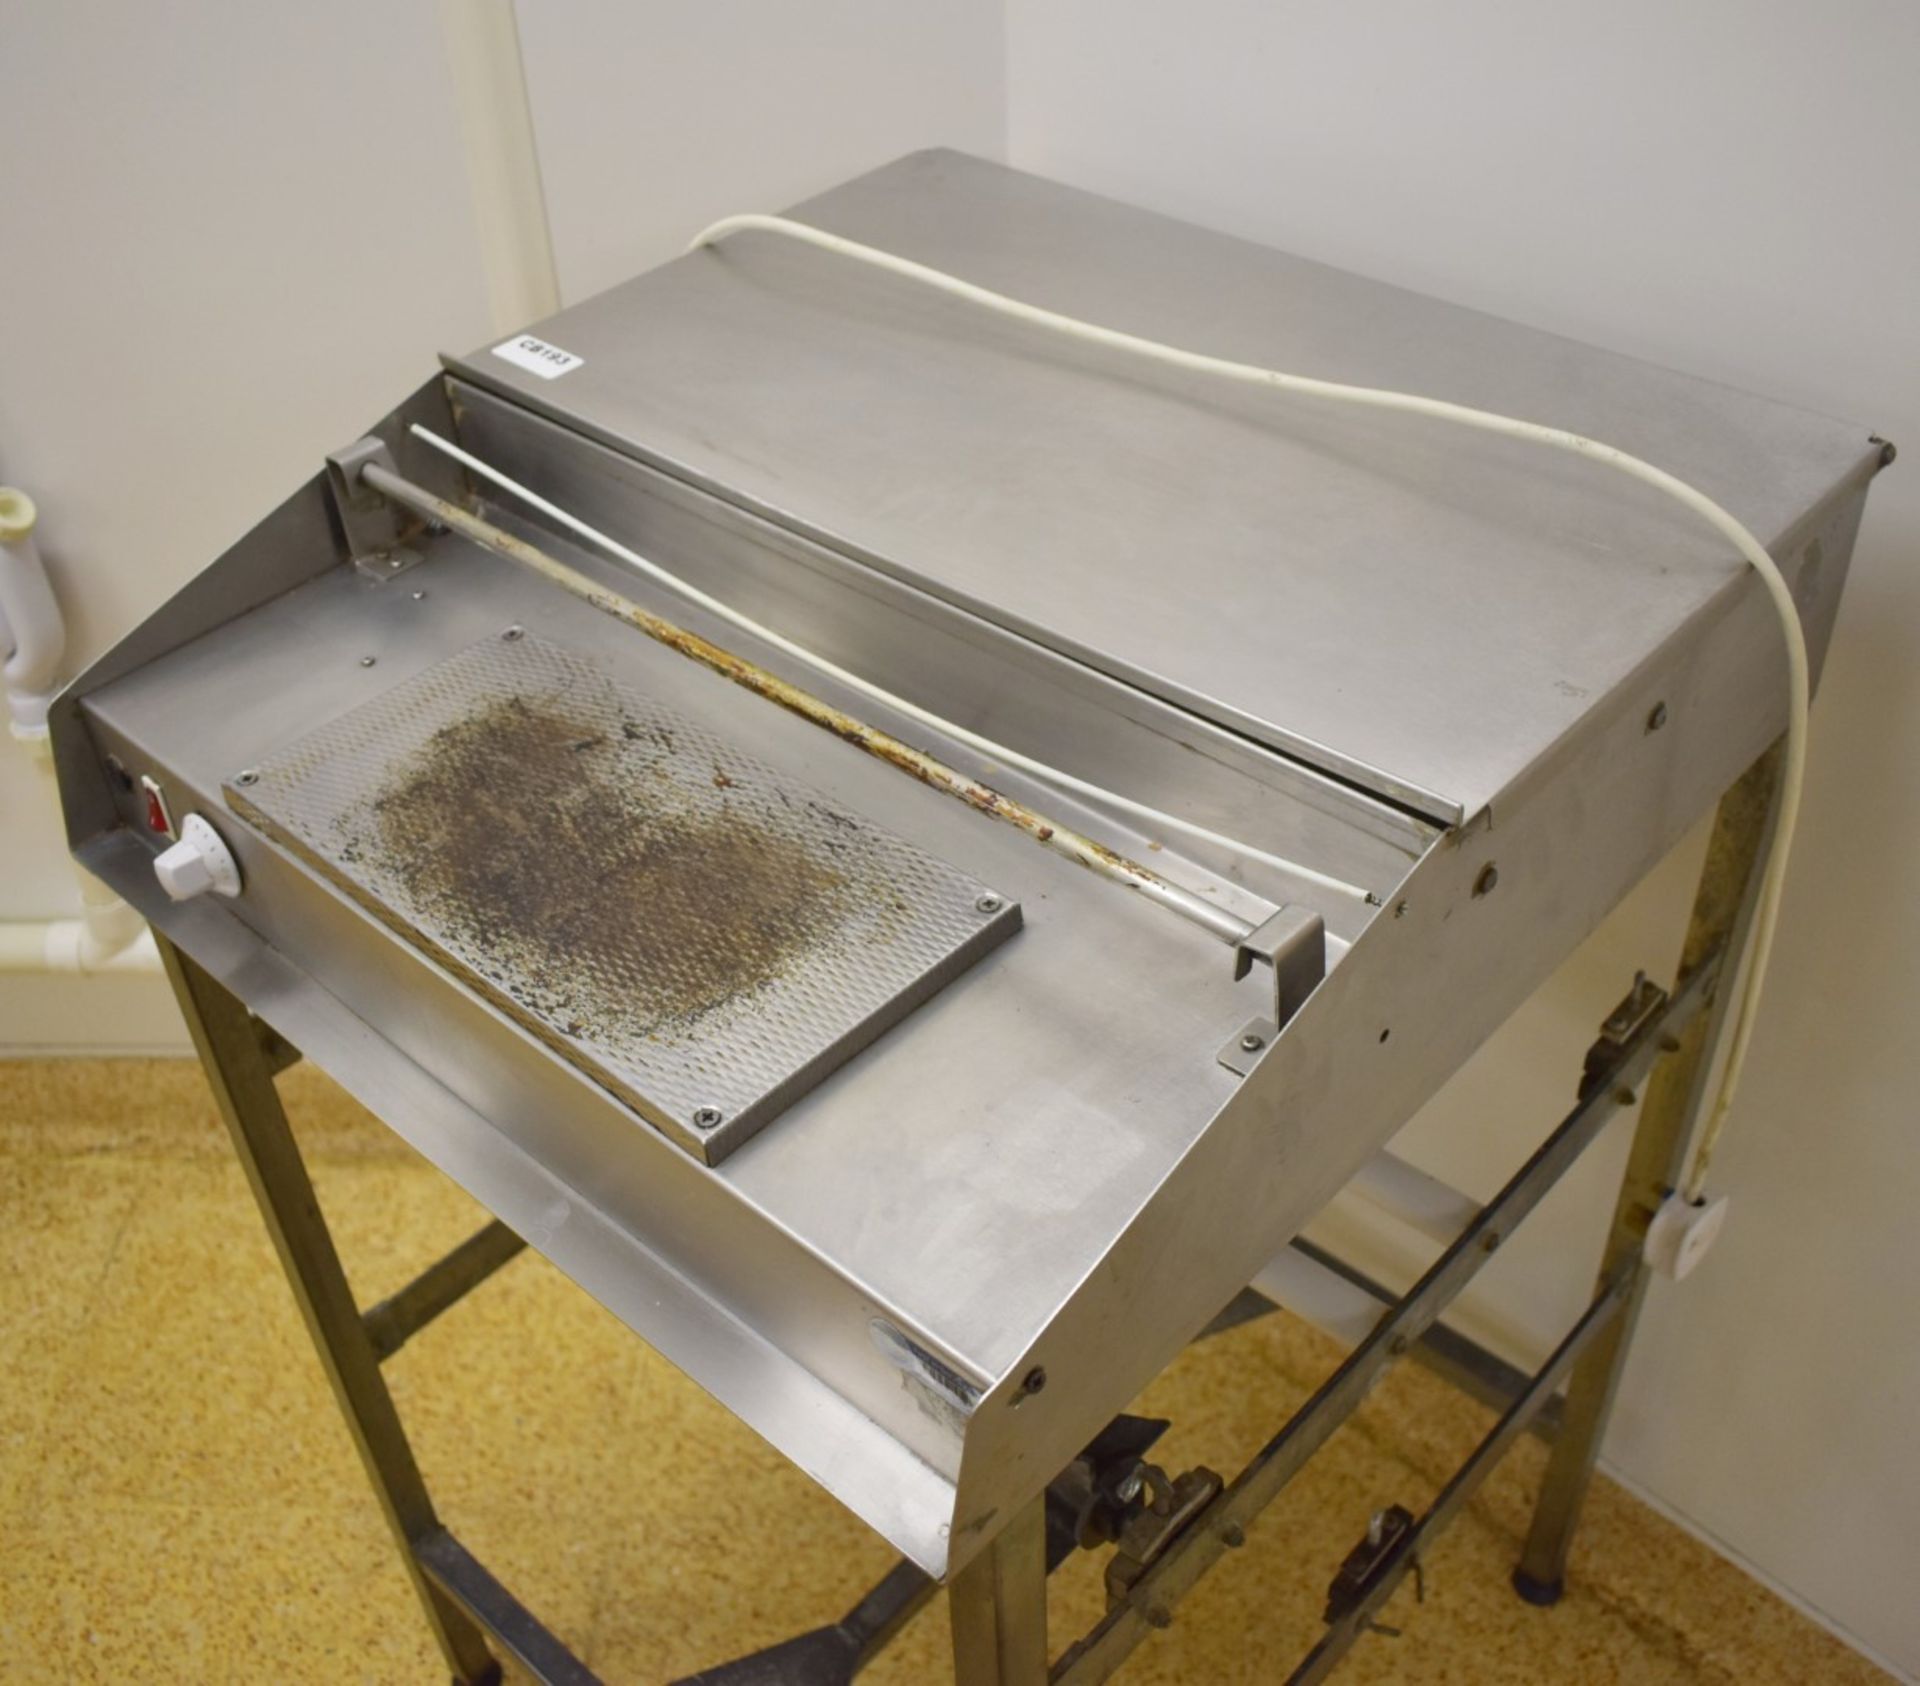 1 x Commercial Food Tray Sealer With Stand - Features Stainless Steel Finish and 240v Plug - H96 x